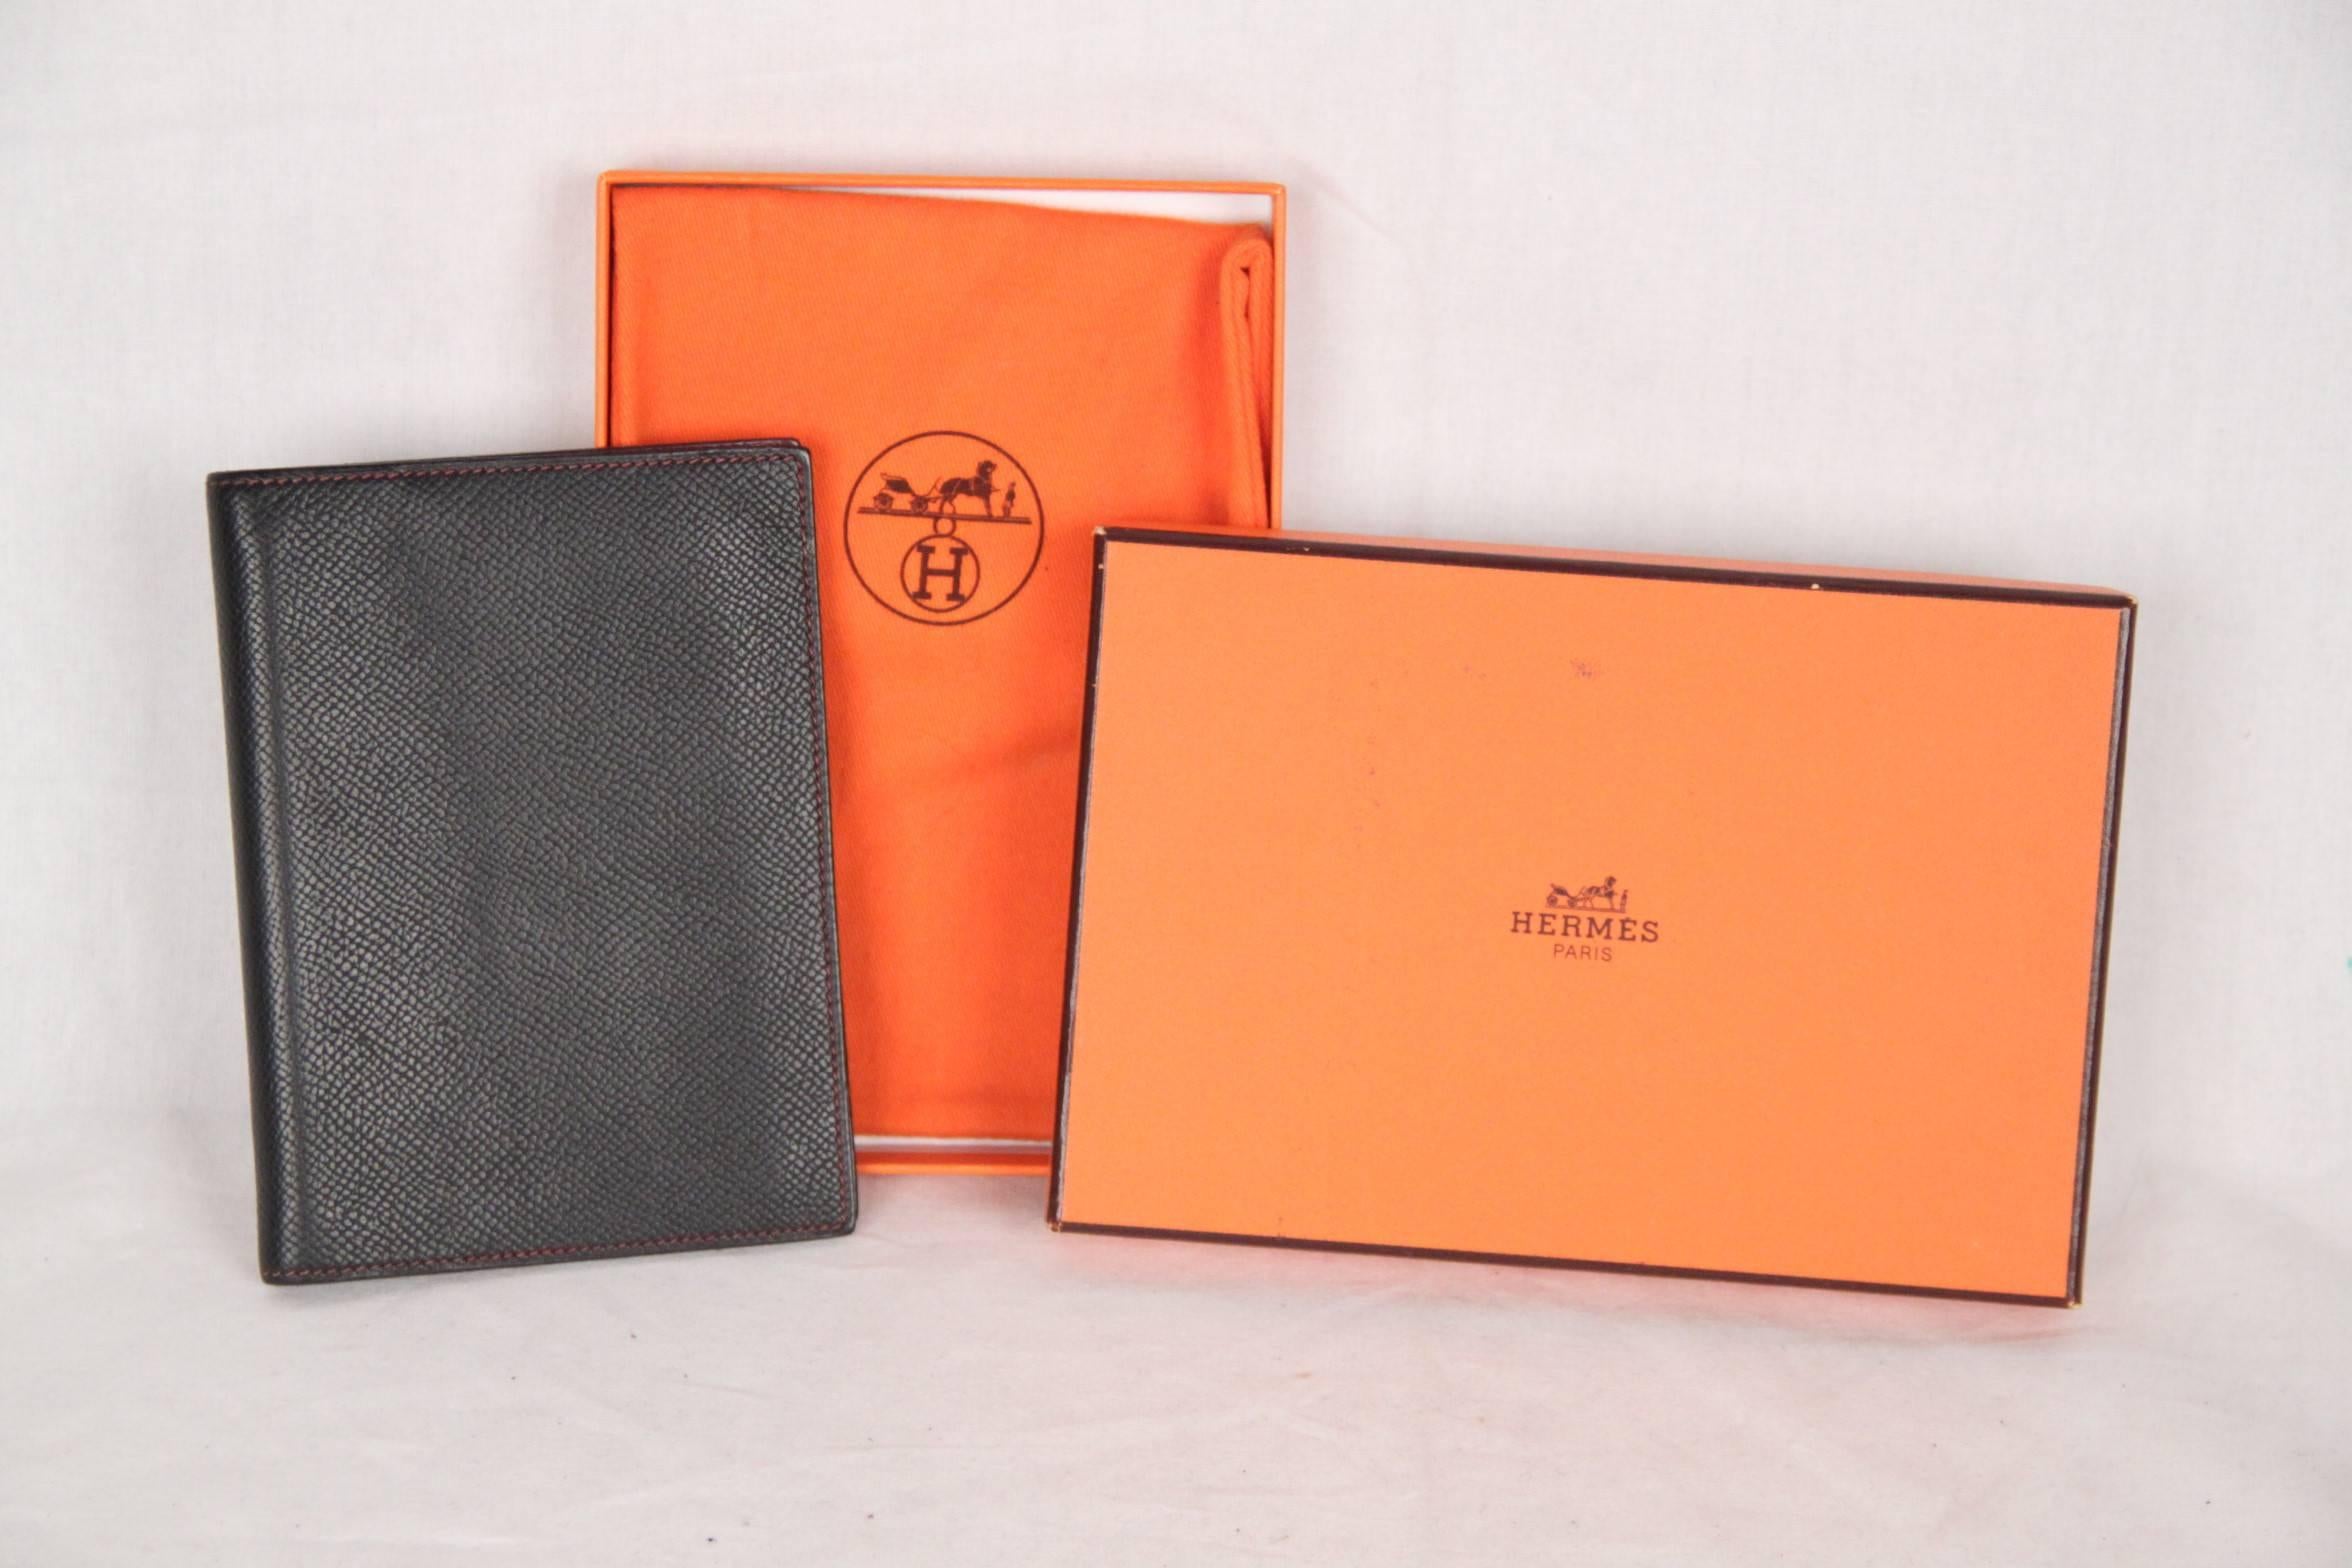 ﻿Brand: HERMES Paris - Made in France

Logos / Tags:'HERMES Paris - Made in France' embossed inside, embossed blind stamp 'Y' in a Circle (which means that the agenda was created in 1995)

Condition: A :EXCELLENT CONDITION - Used once or twice.